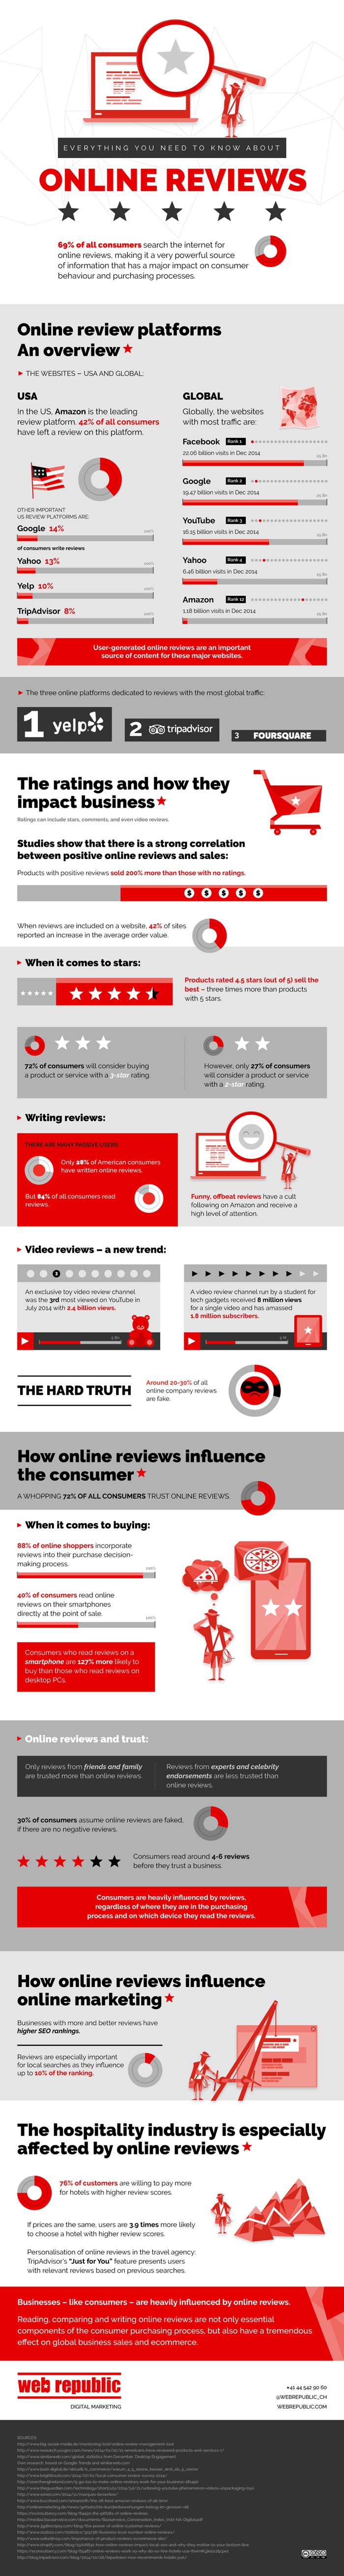 Everything You Need to Know About Online Reviews